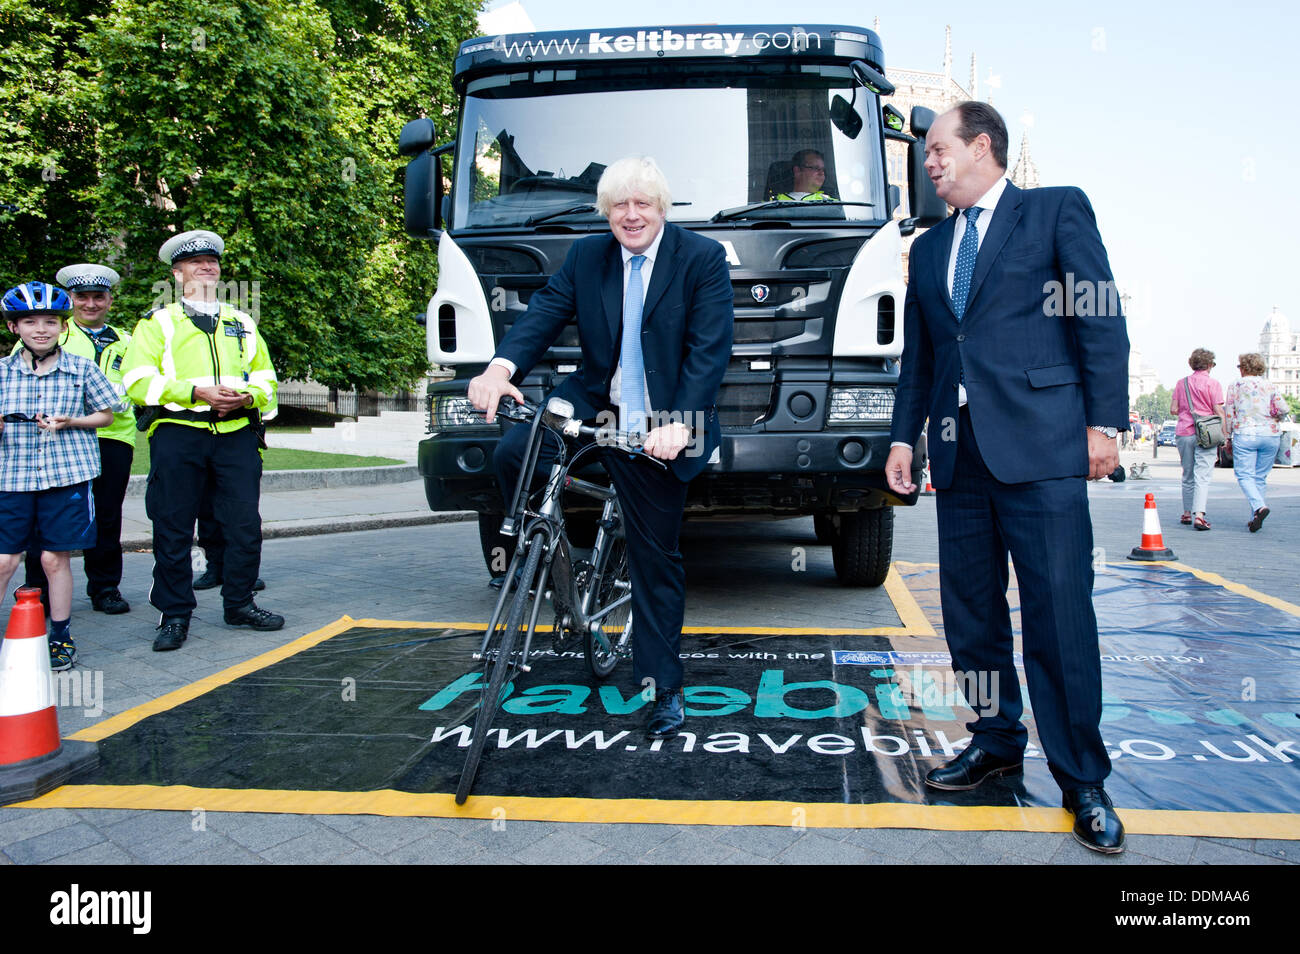 London, UK - 4 September 2013: the Mayor of London Boris Johnson and the Transport Minister Stephen Hammond take part in the Metropolitan Police ‘Exchanging Places’ event, organised to raise awareness of the safety issues faced by lorry drivers and cyclists. Credit:  Piero Cruciatti/Alamy Live News Stock Photo